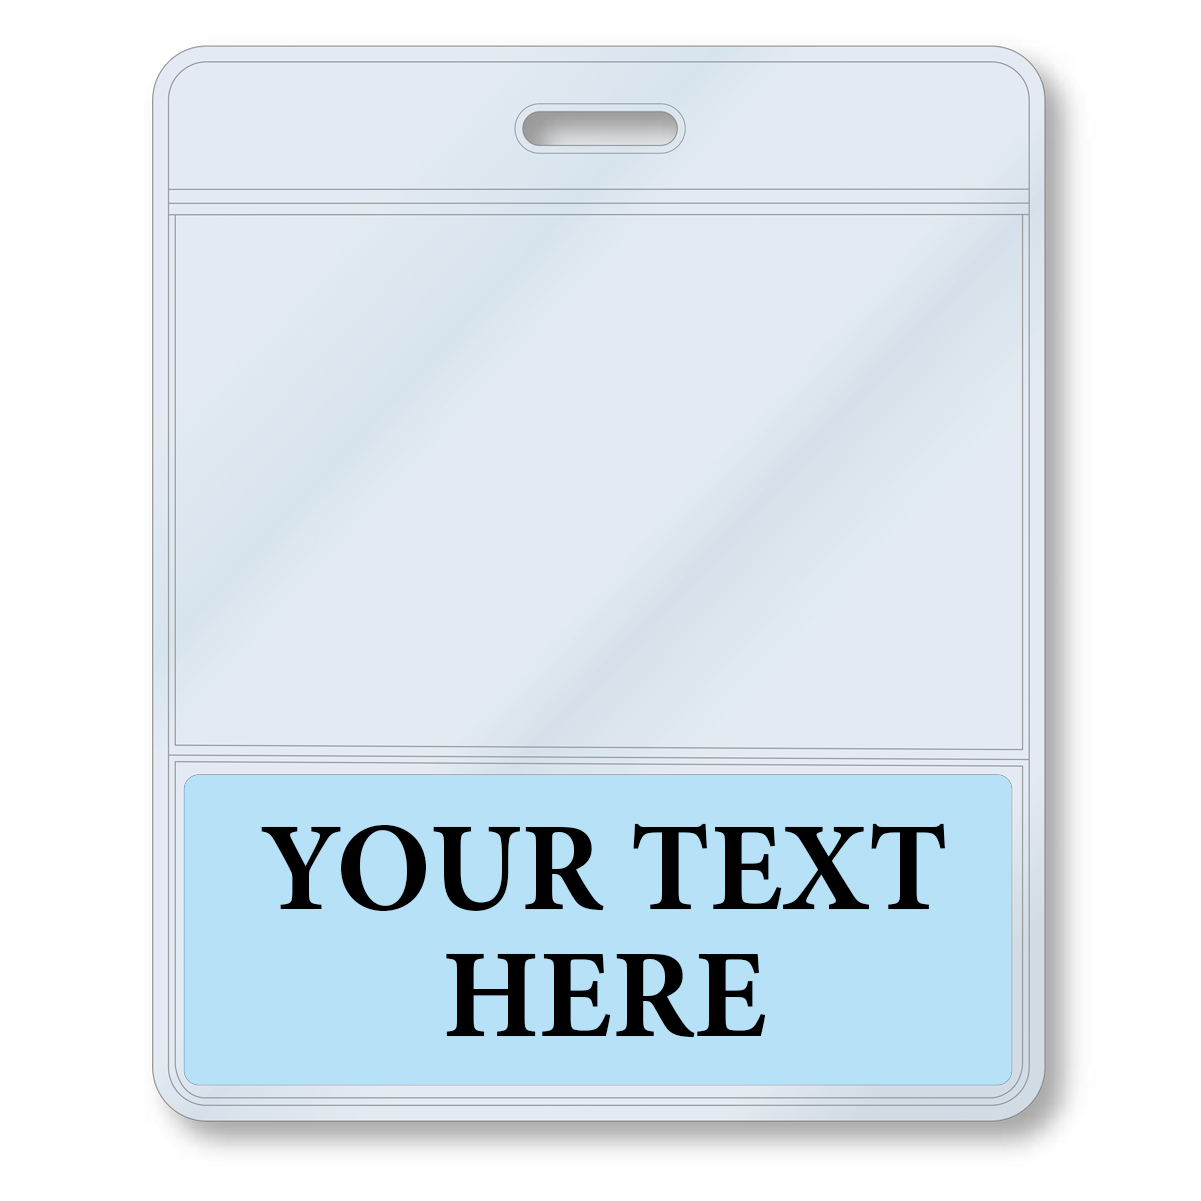 An empty Custom Printed BadgeBottoms® Horizontal (Badge Holder & Badge Buddy IN ONE) with a blank top section and a blue bottom section labeled "YOUR TEXT HERE," perfect for adding your customizable title.